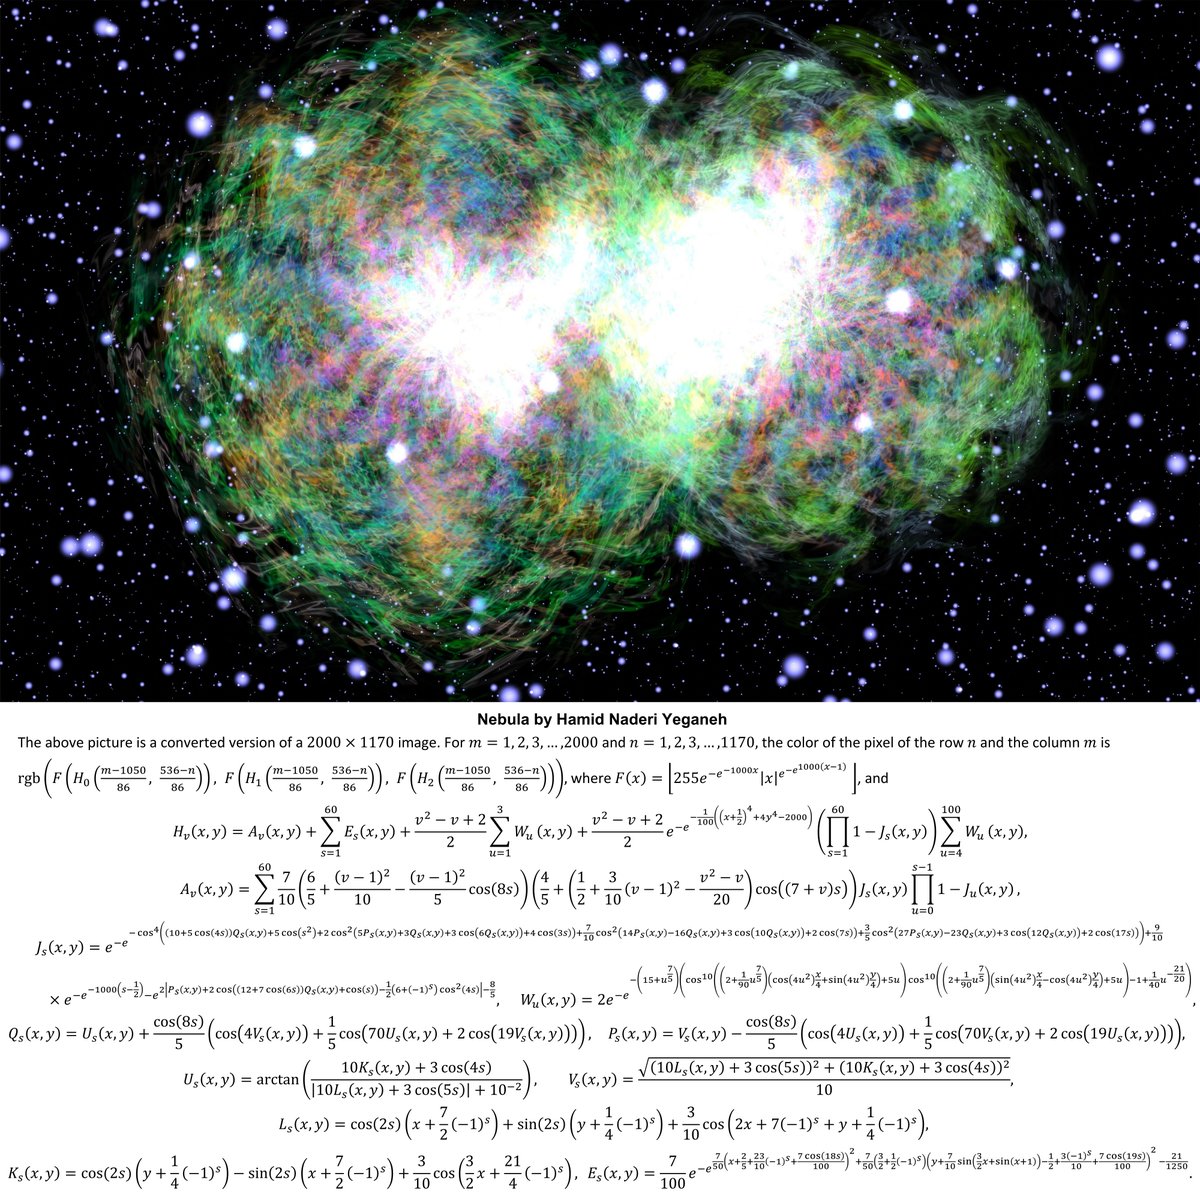 I drew this nebula with mathematical equations.